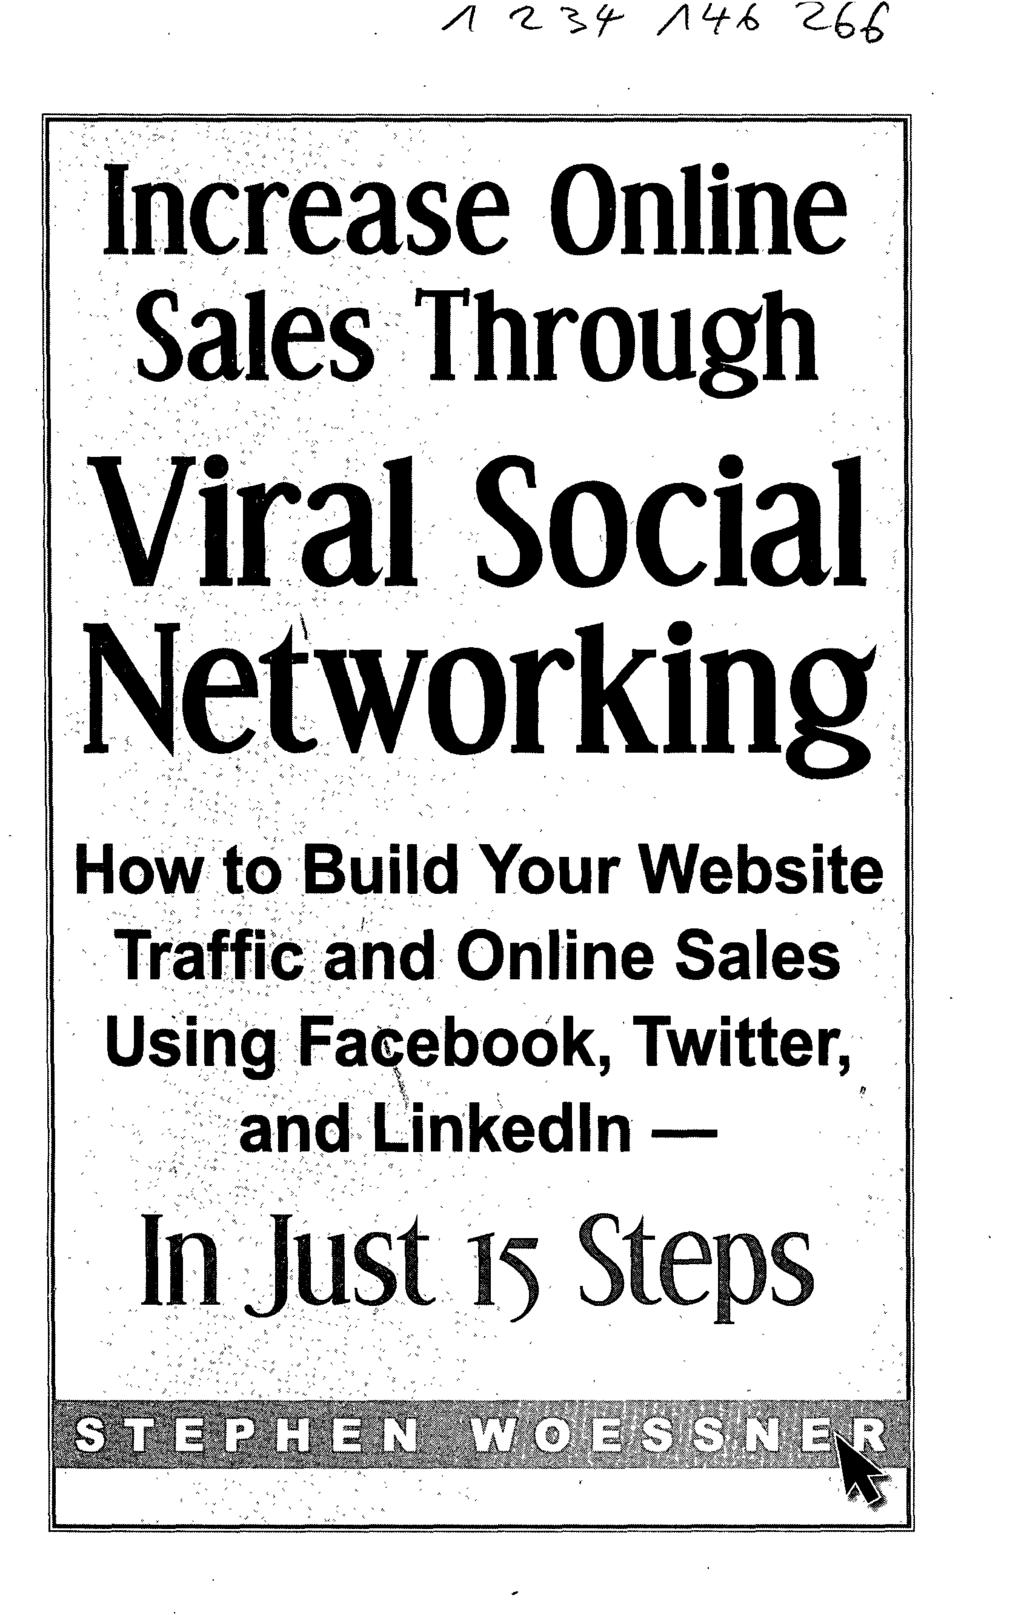 Increase Online Sales Through Viral Social How to Build Your Website